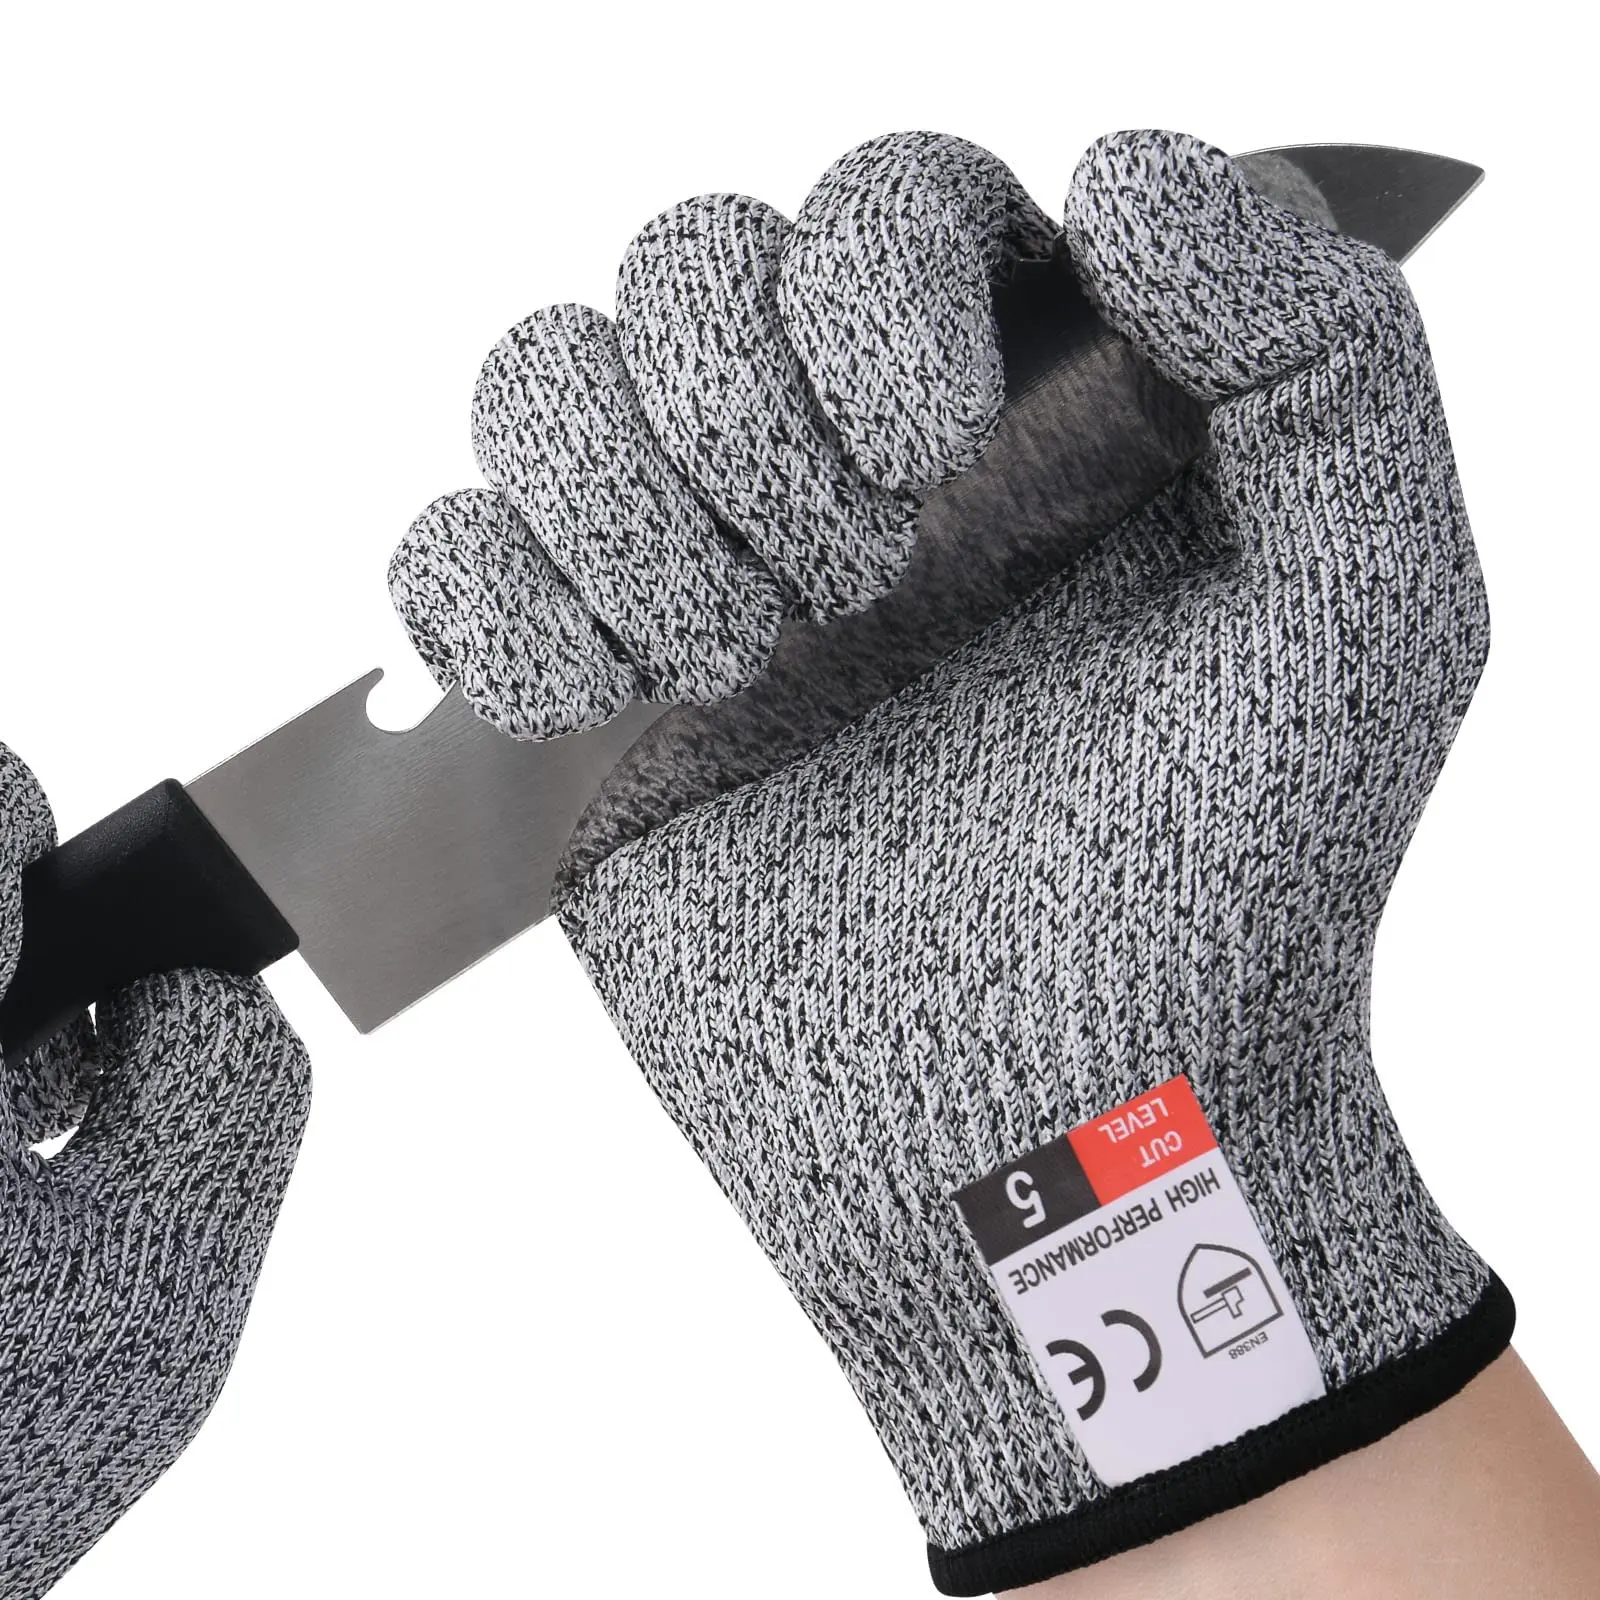 Premium Cut Resistant Gloves Food Grade Level 5 Protection Machine Washable Lightweight Protective Gloves